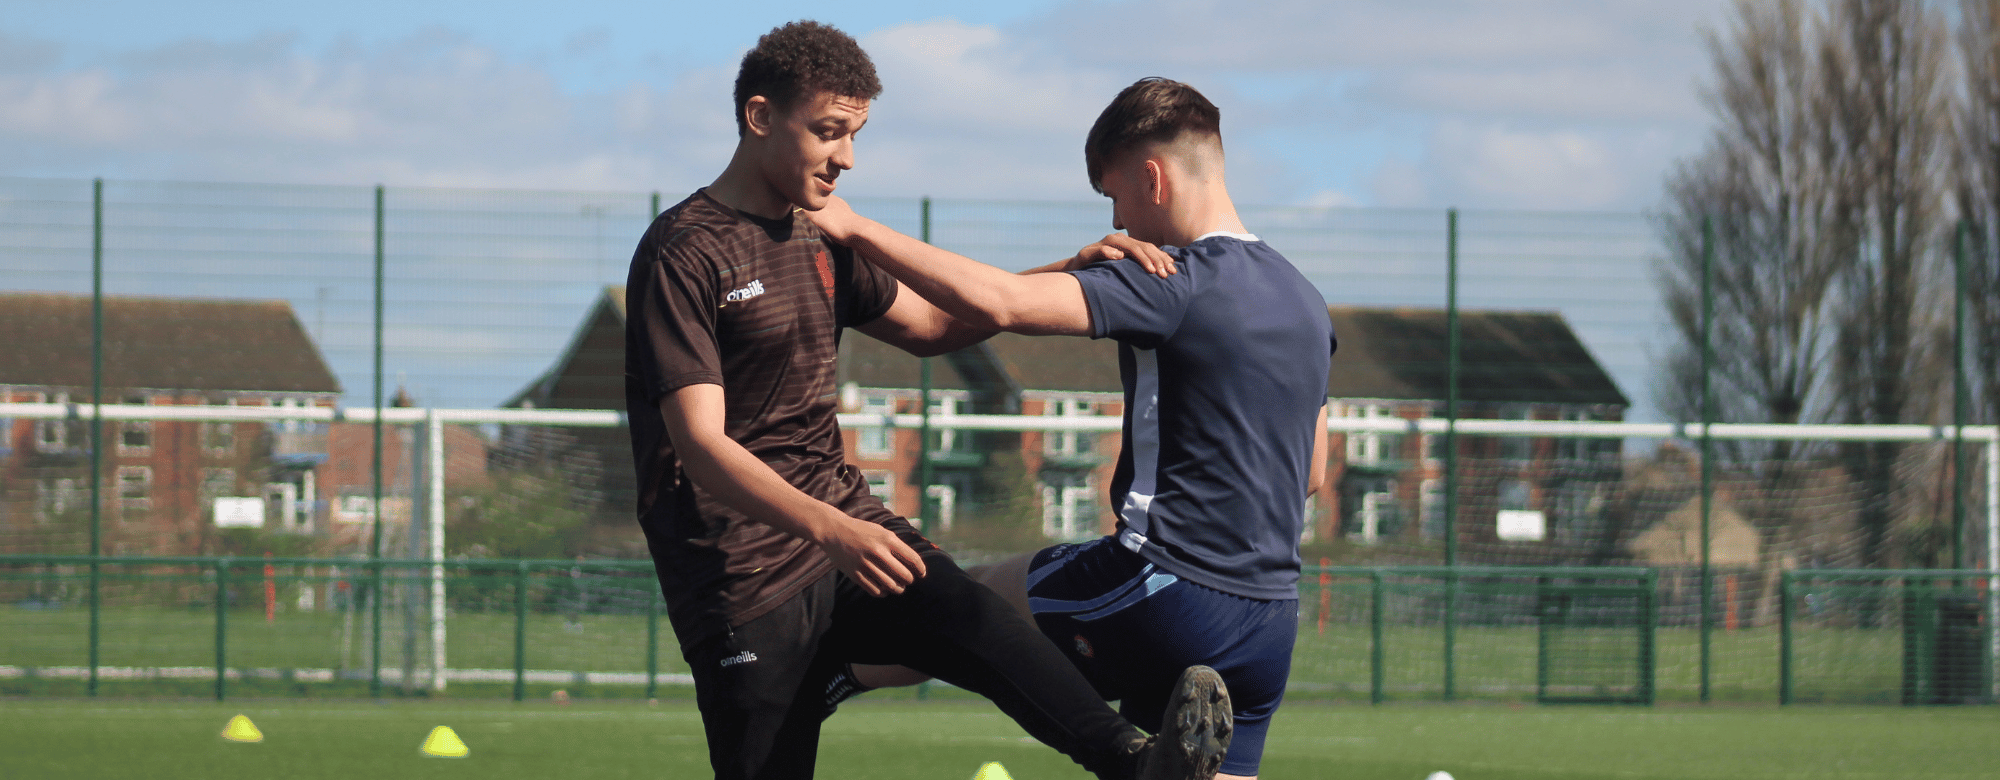 Sports College Hosting Open Training Days This August